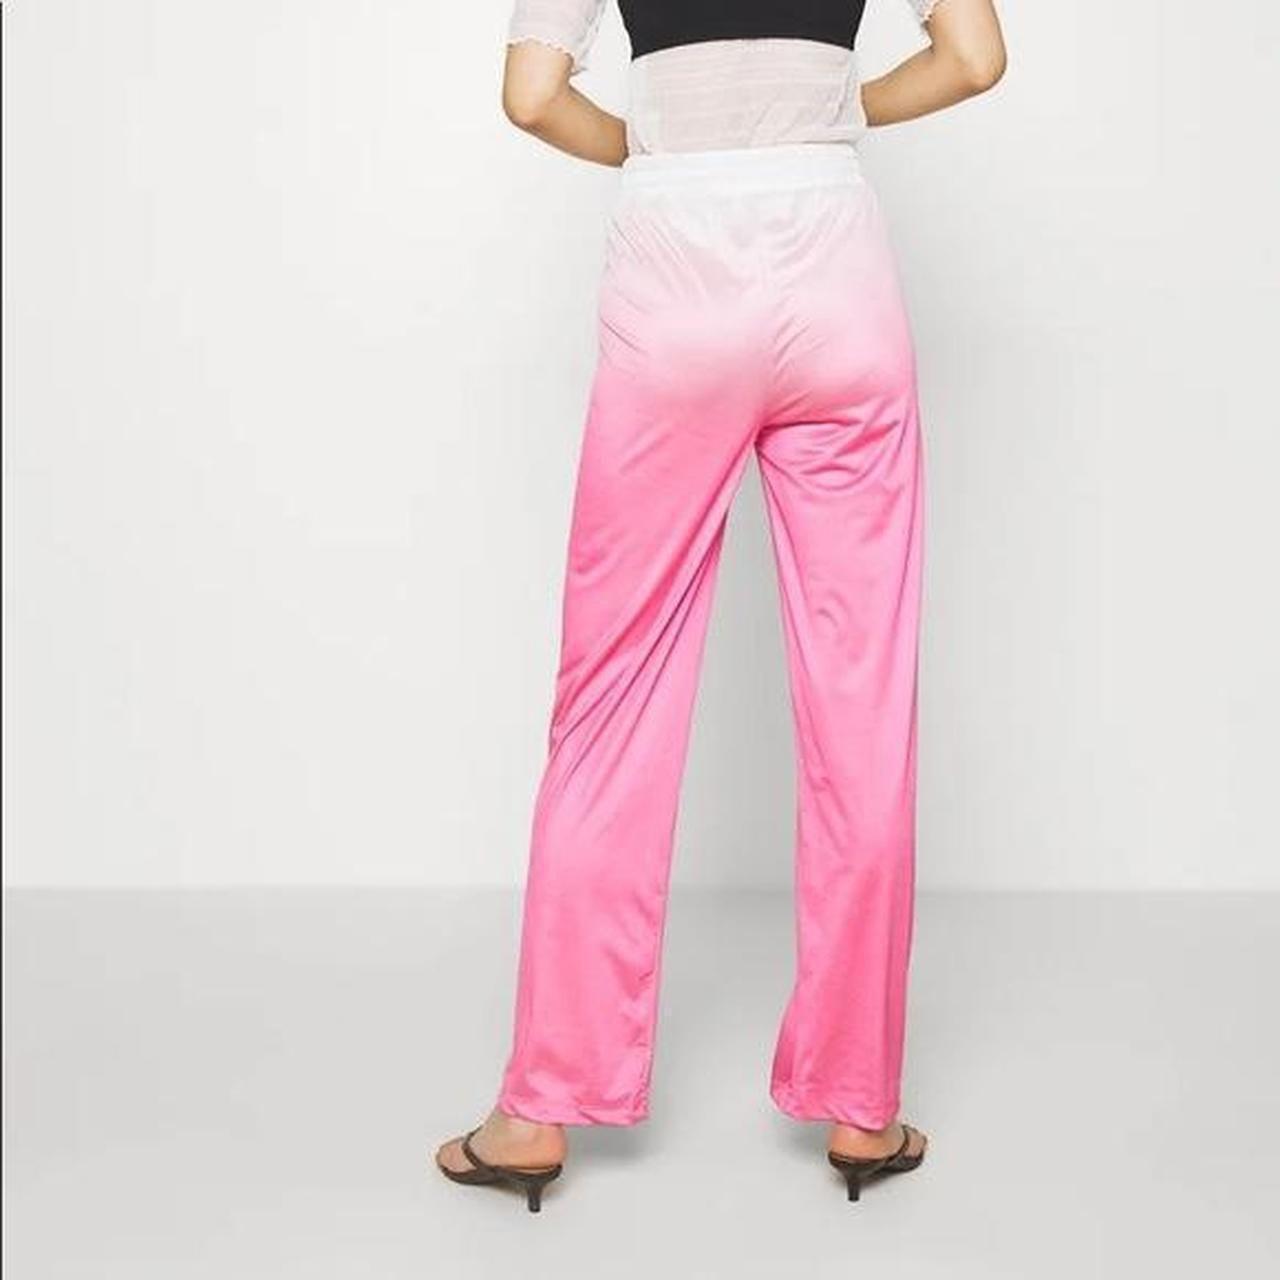 Hosbjerg Women's White and Pink Trousers (4)